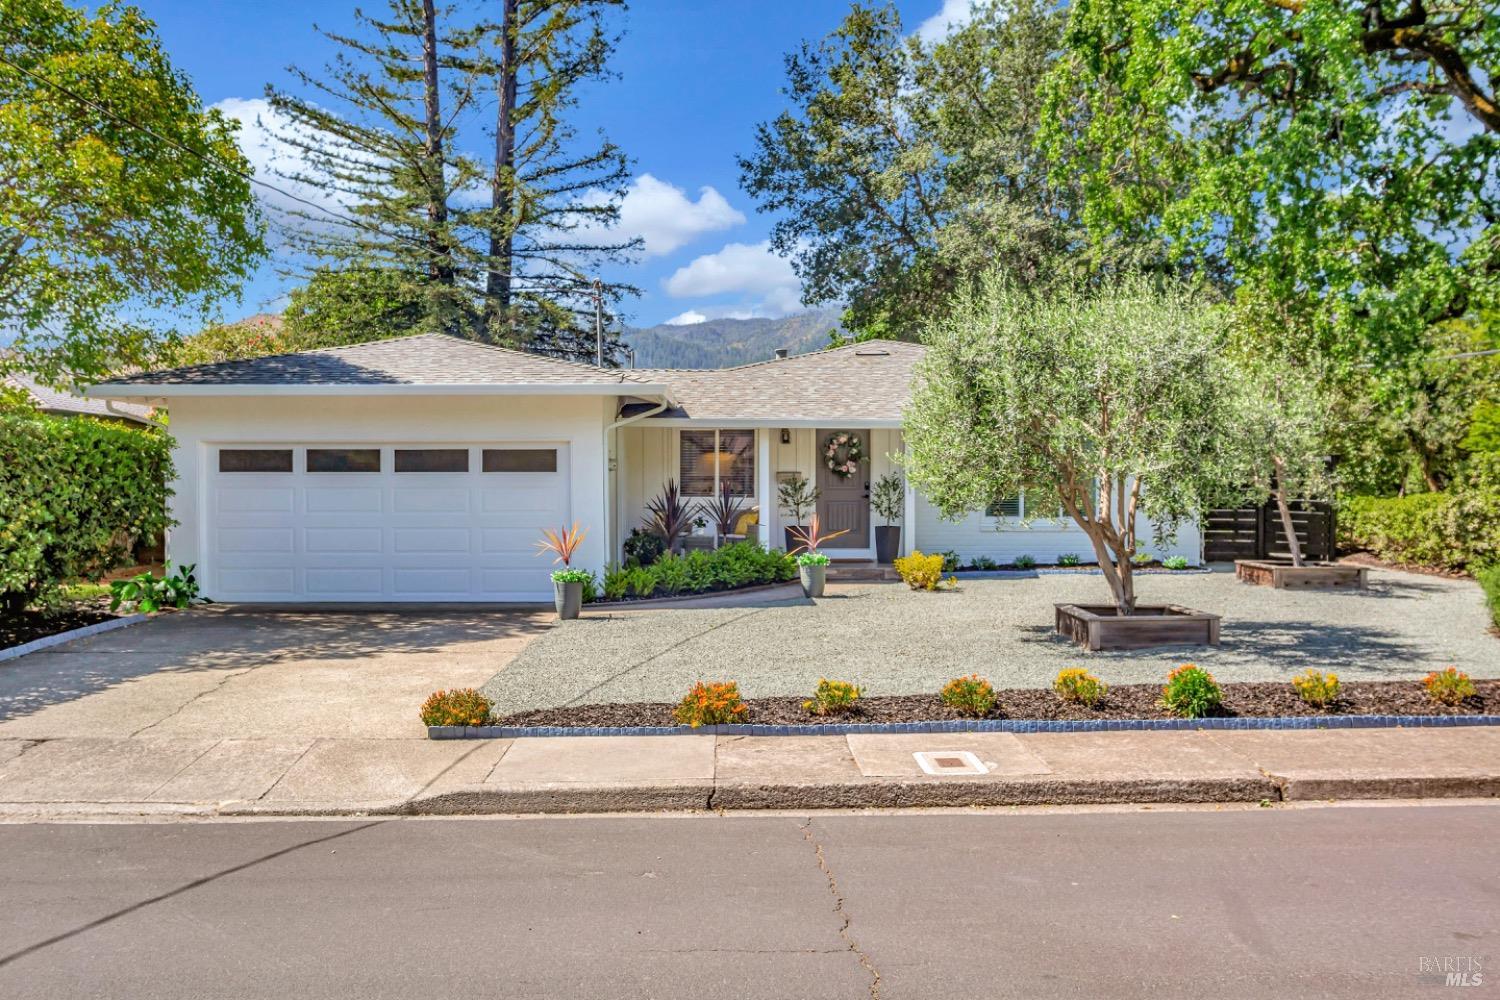 Photo of 1191 Hudson Ave in St Helena, CA